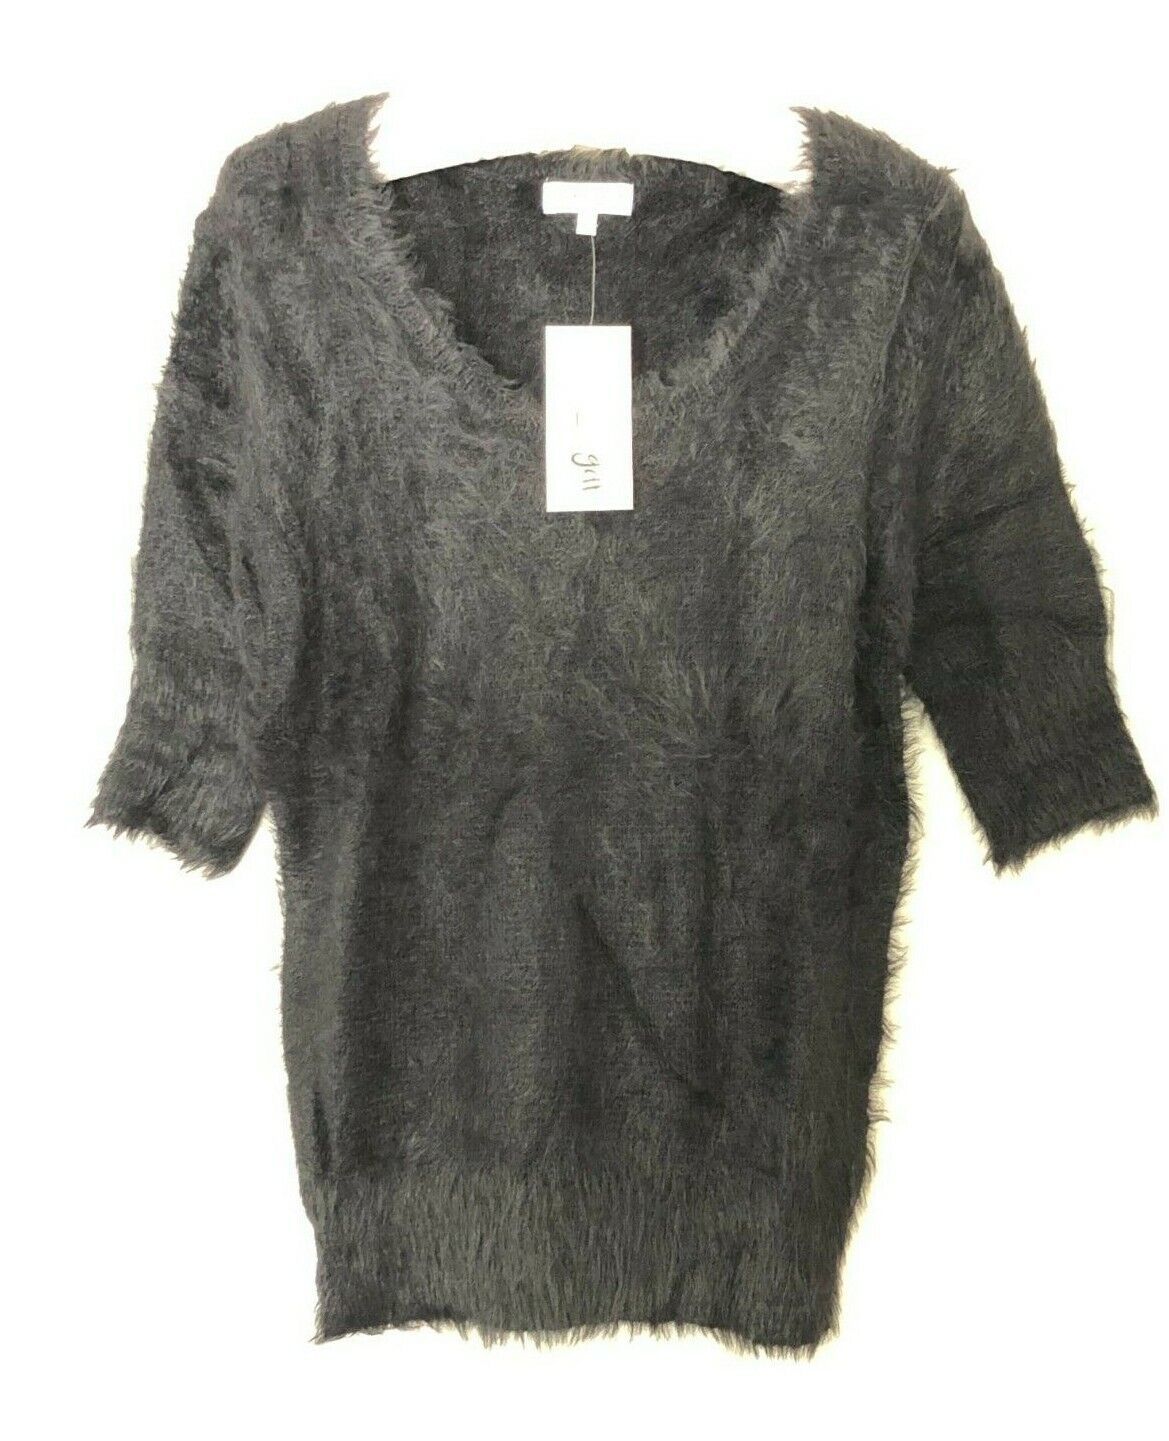 Primary image for DEEP SUGAR Fuzzy Knit Scoop-Neck Tunic Sweater , Size Small